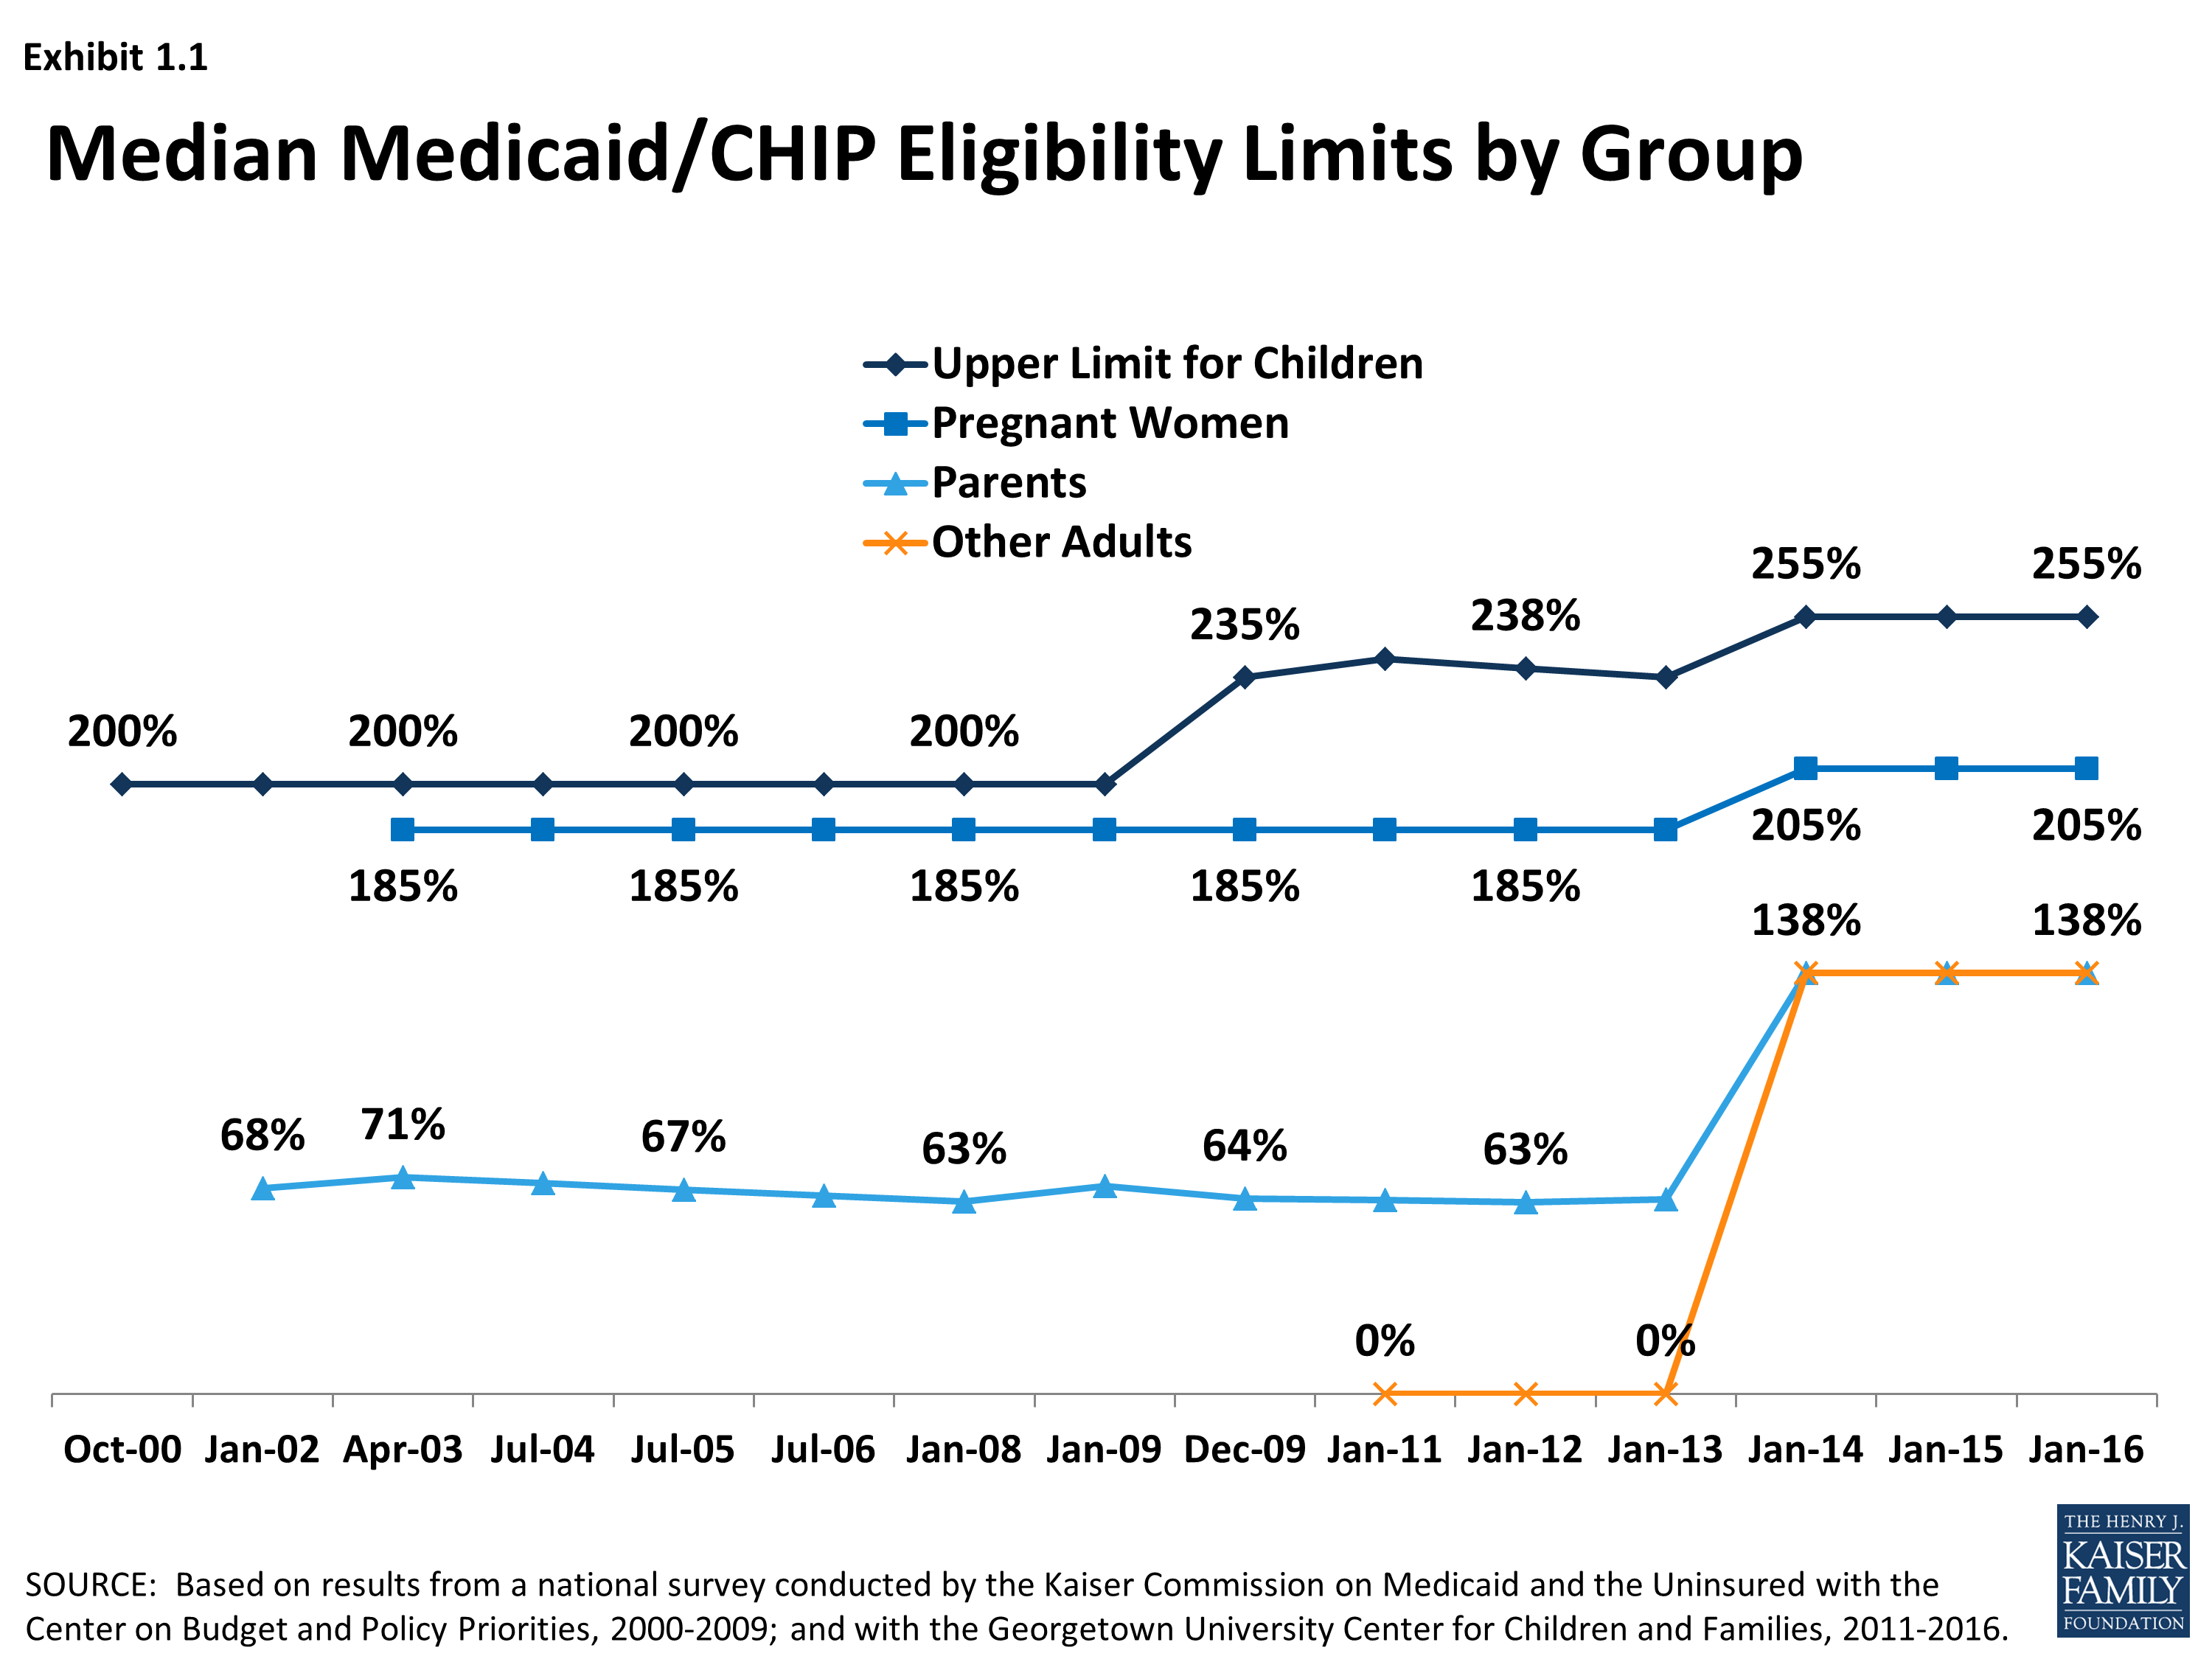 Trends In Medicaid And Chip Eligibility Over Time – Section 1